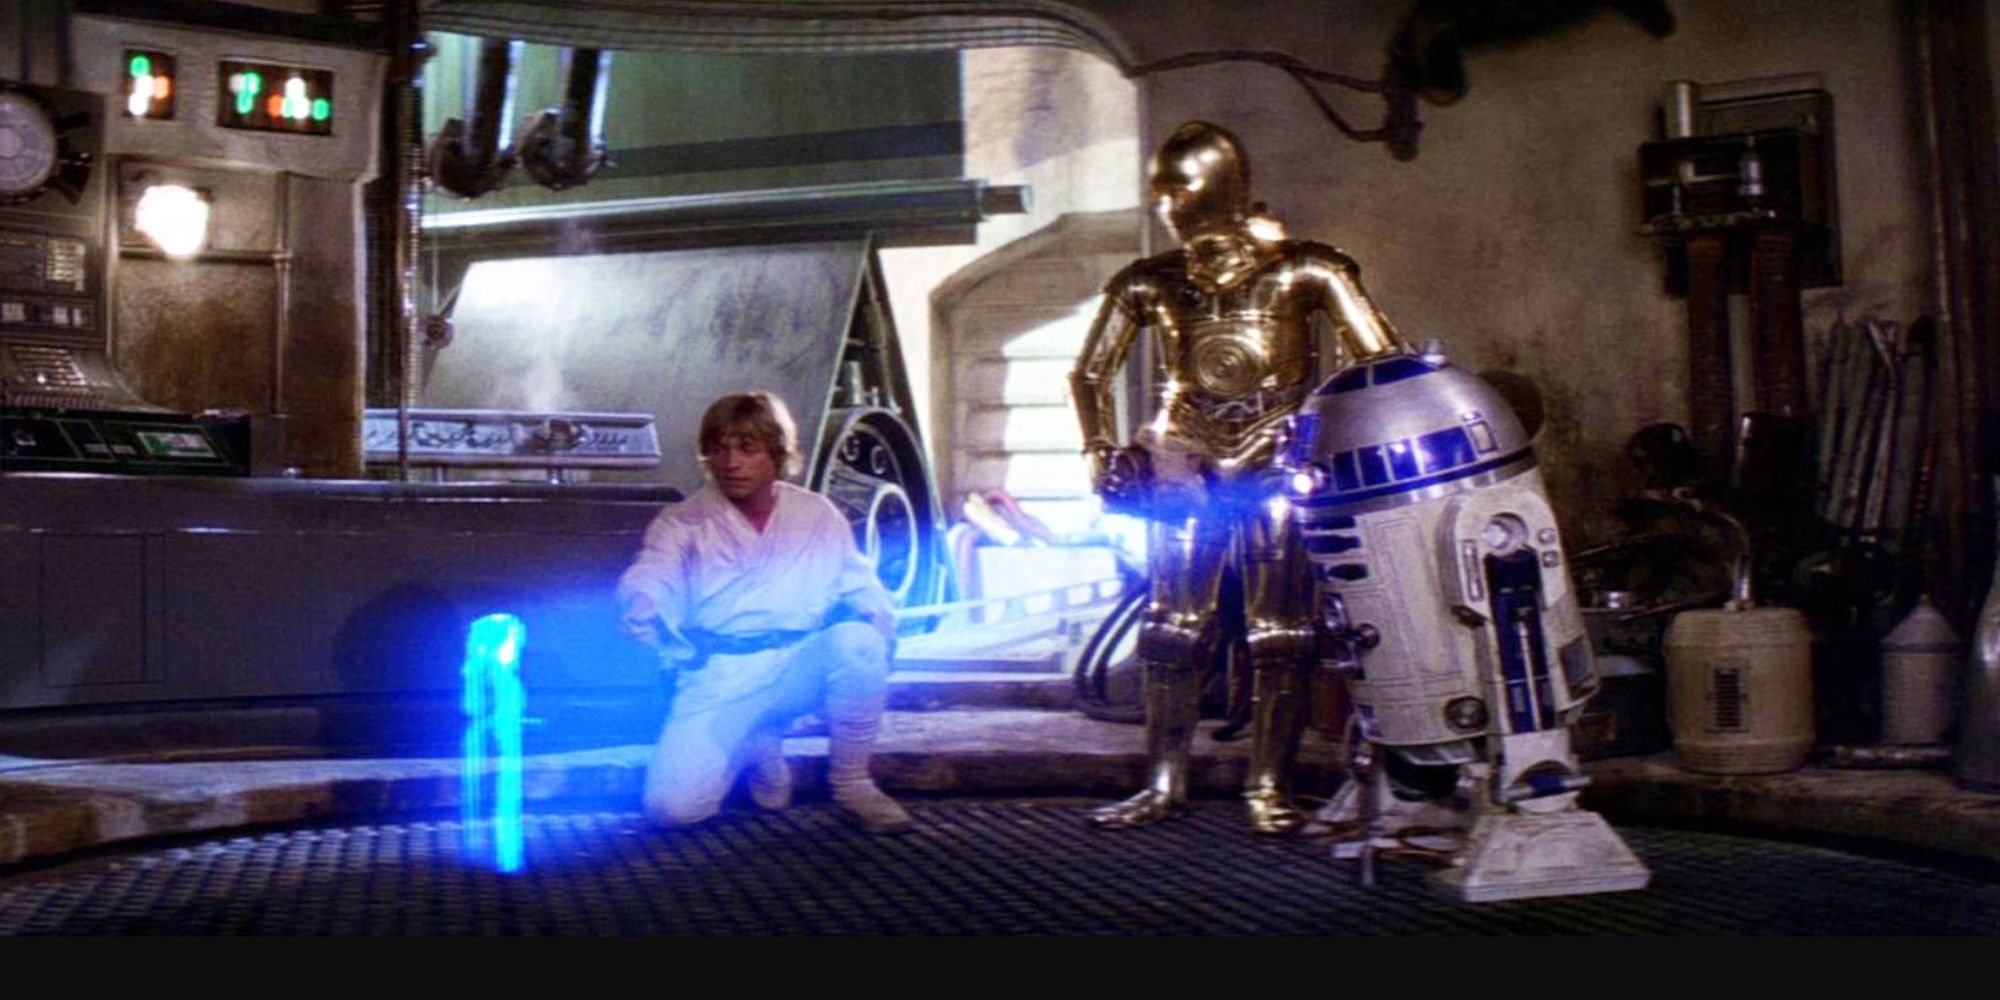 R2-D2 displays Leia's message in a hologram in front of Luke Skywalker and C-3P0